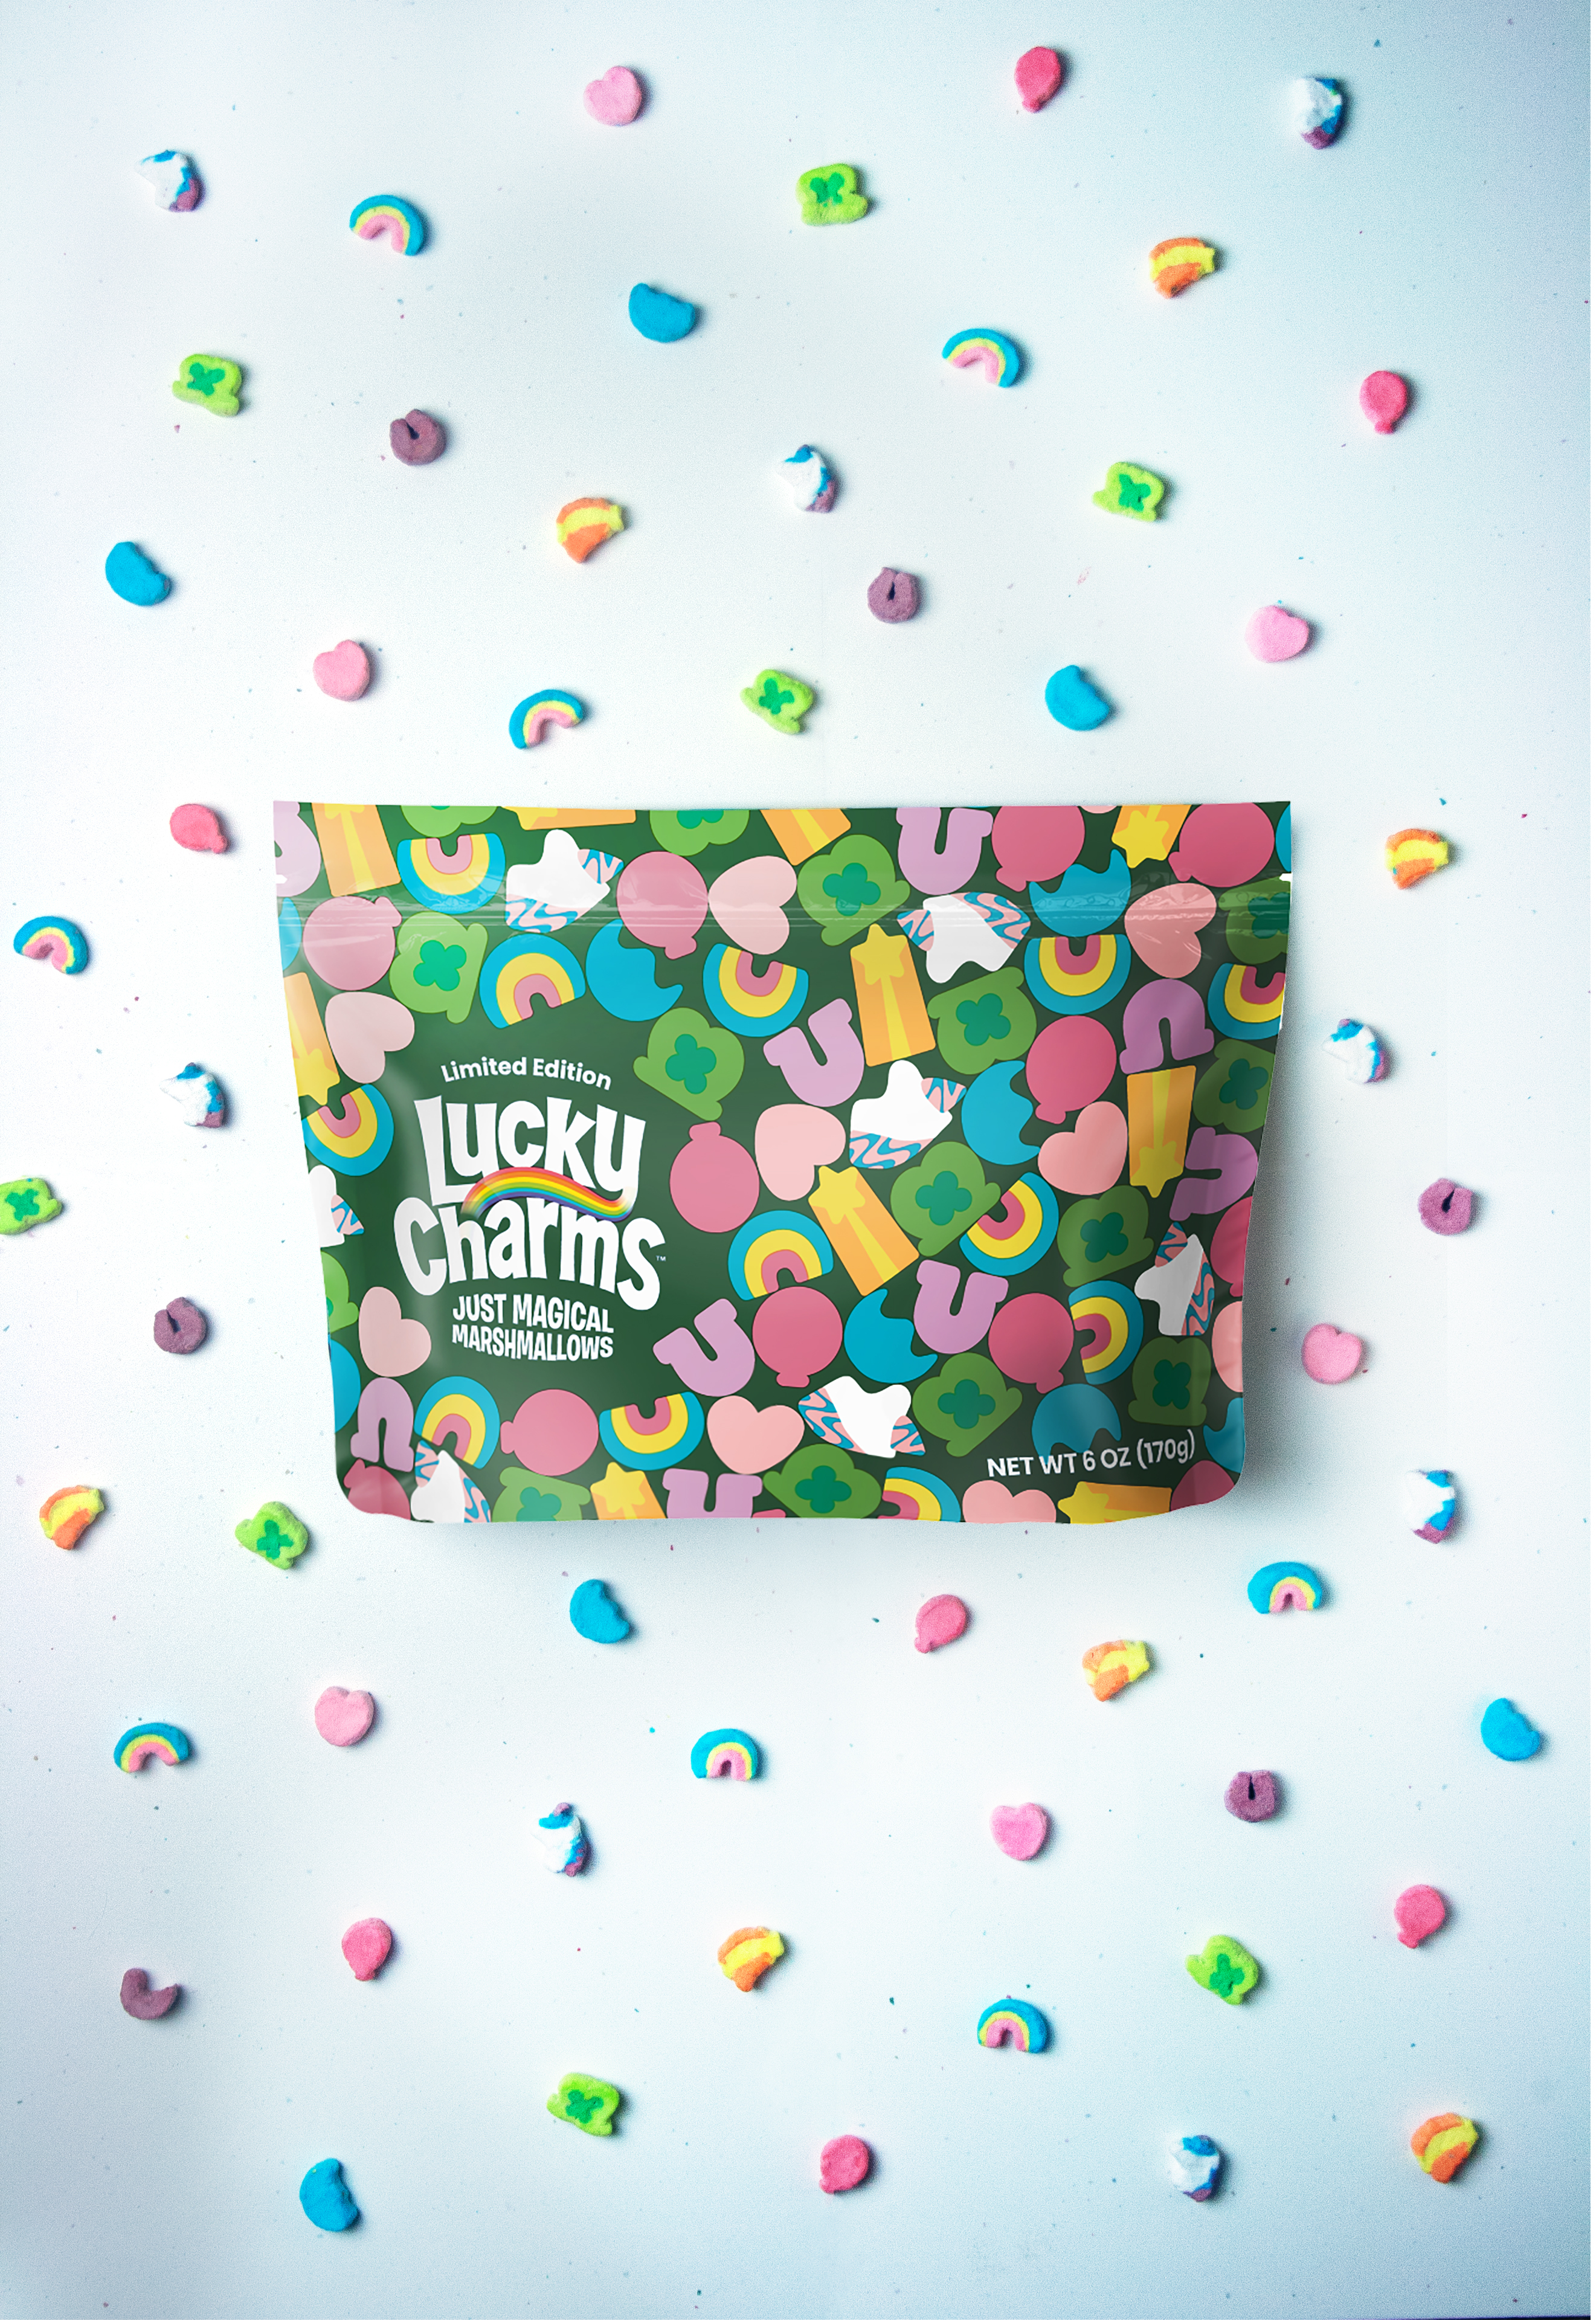 Lucky Charms debuts 'marshmallow-revealing technology